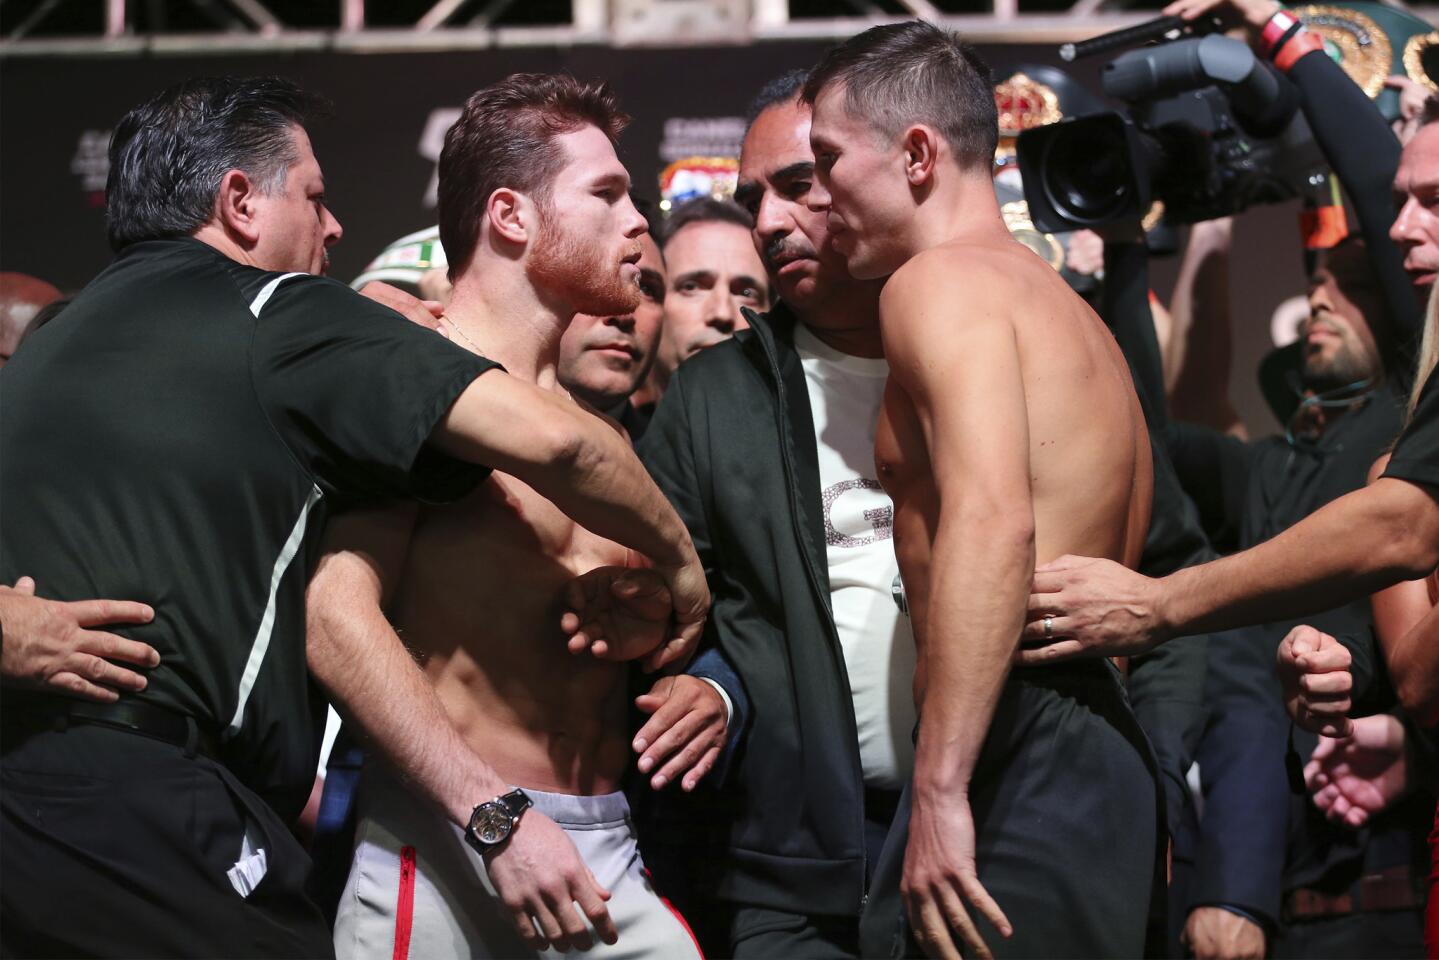 Canelo Alvarez, center left, and Gennady Golovkin face off during a weigh-in at T-Mobile Arena in Las Vegas, Friday, Sept. 14, 2018. Alvarez and Golovkin will fight Saturday night in a middleweight title bout. (Erik Verduzco/Las Vegas Review-Journal via AP)